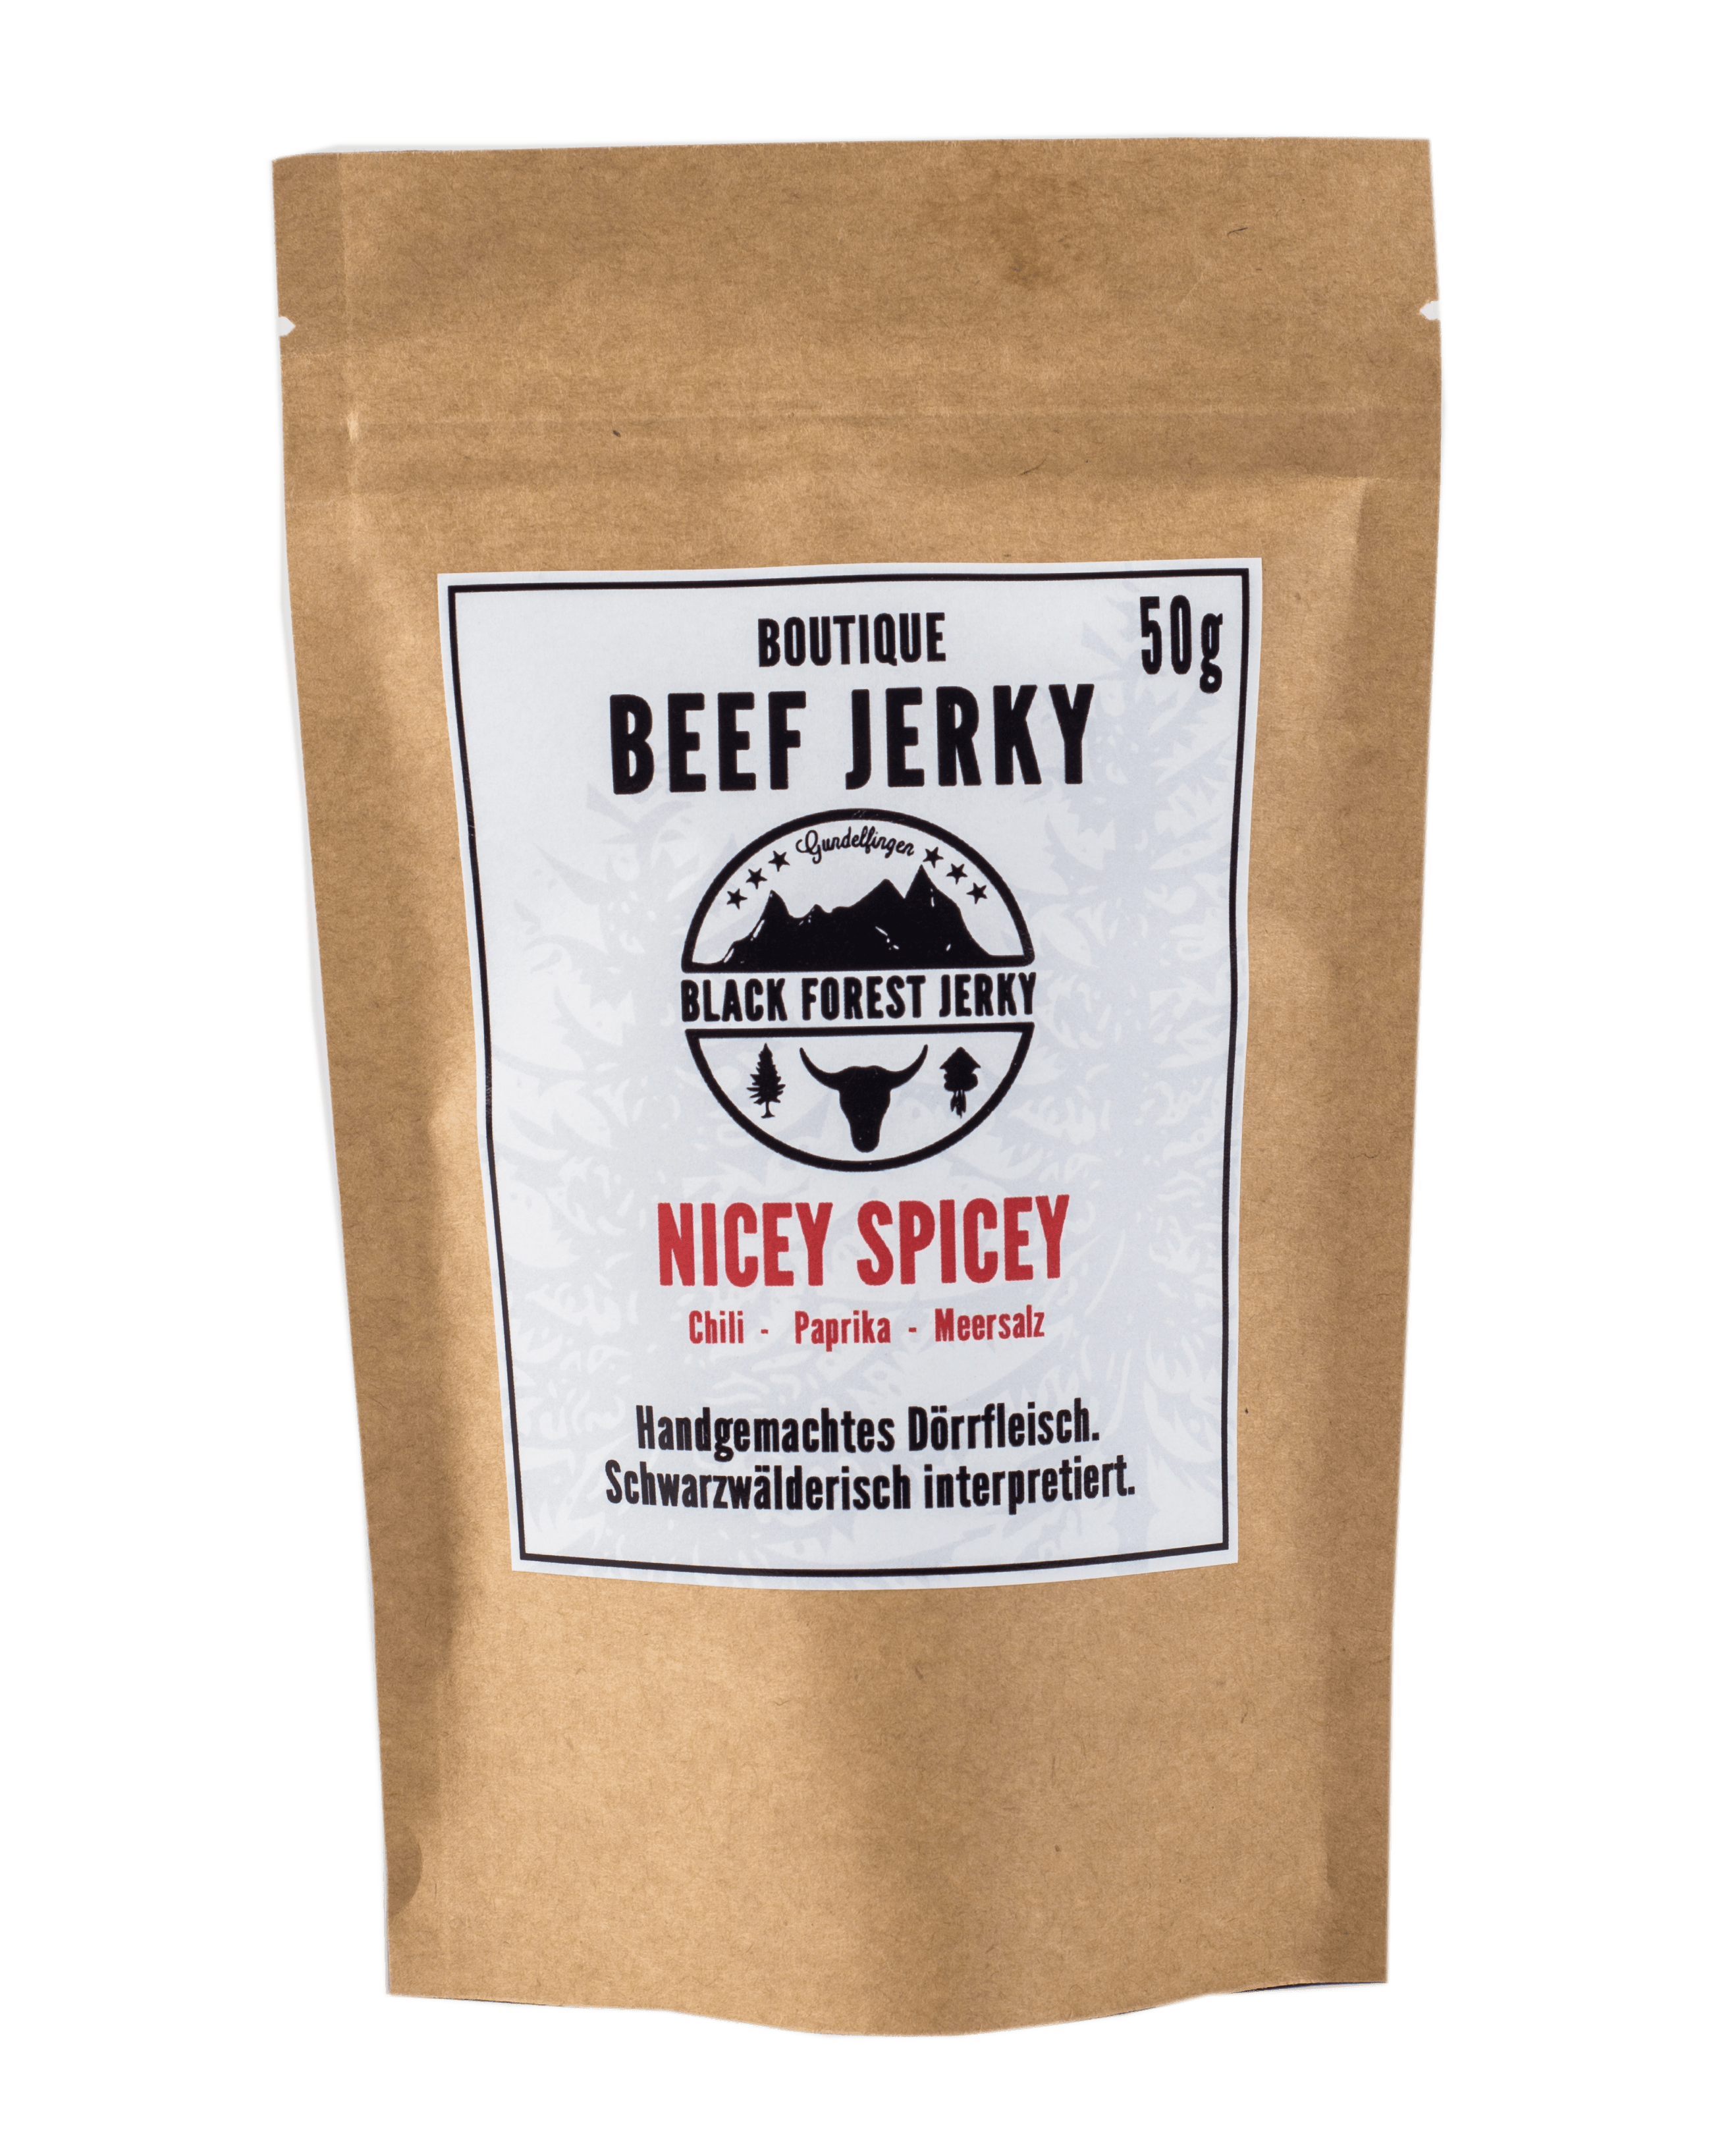 Nicey Spicey (50g) bfconceptstore 